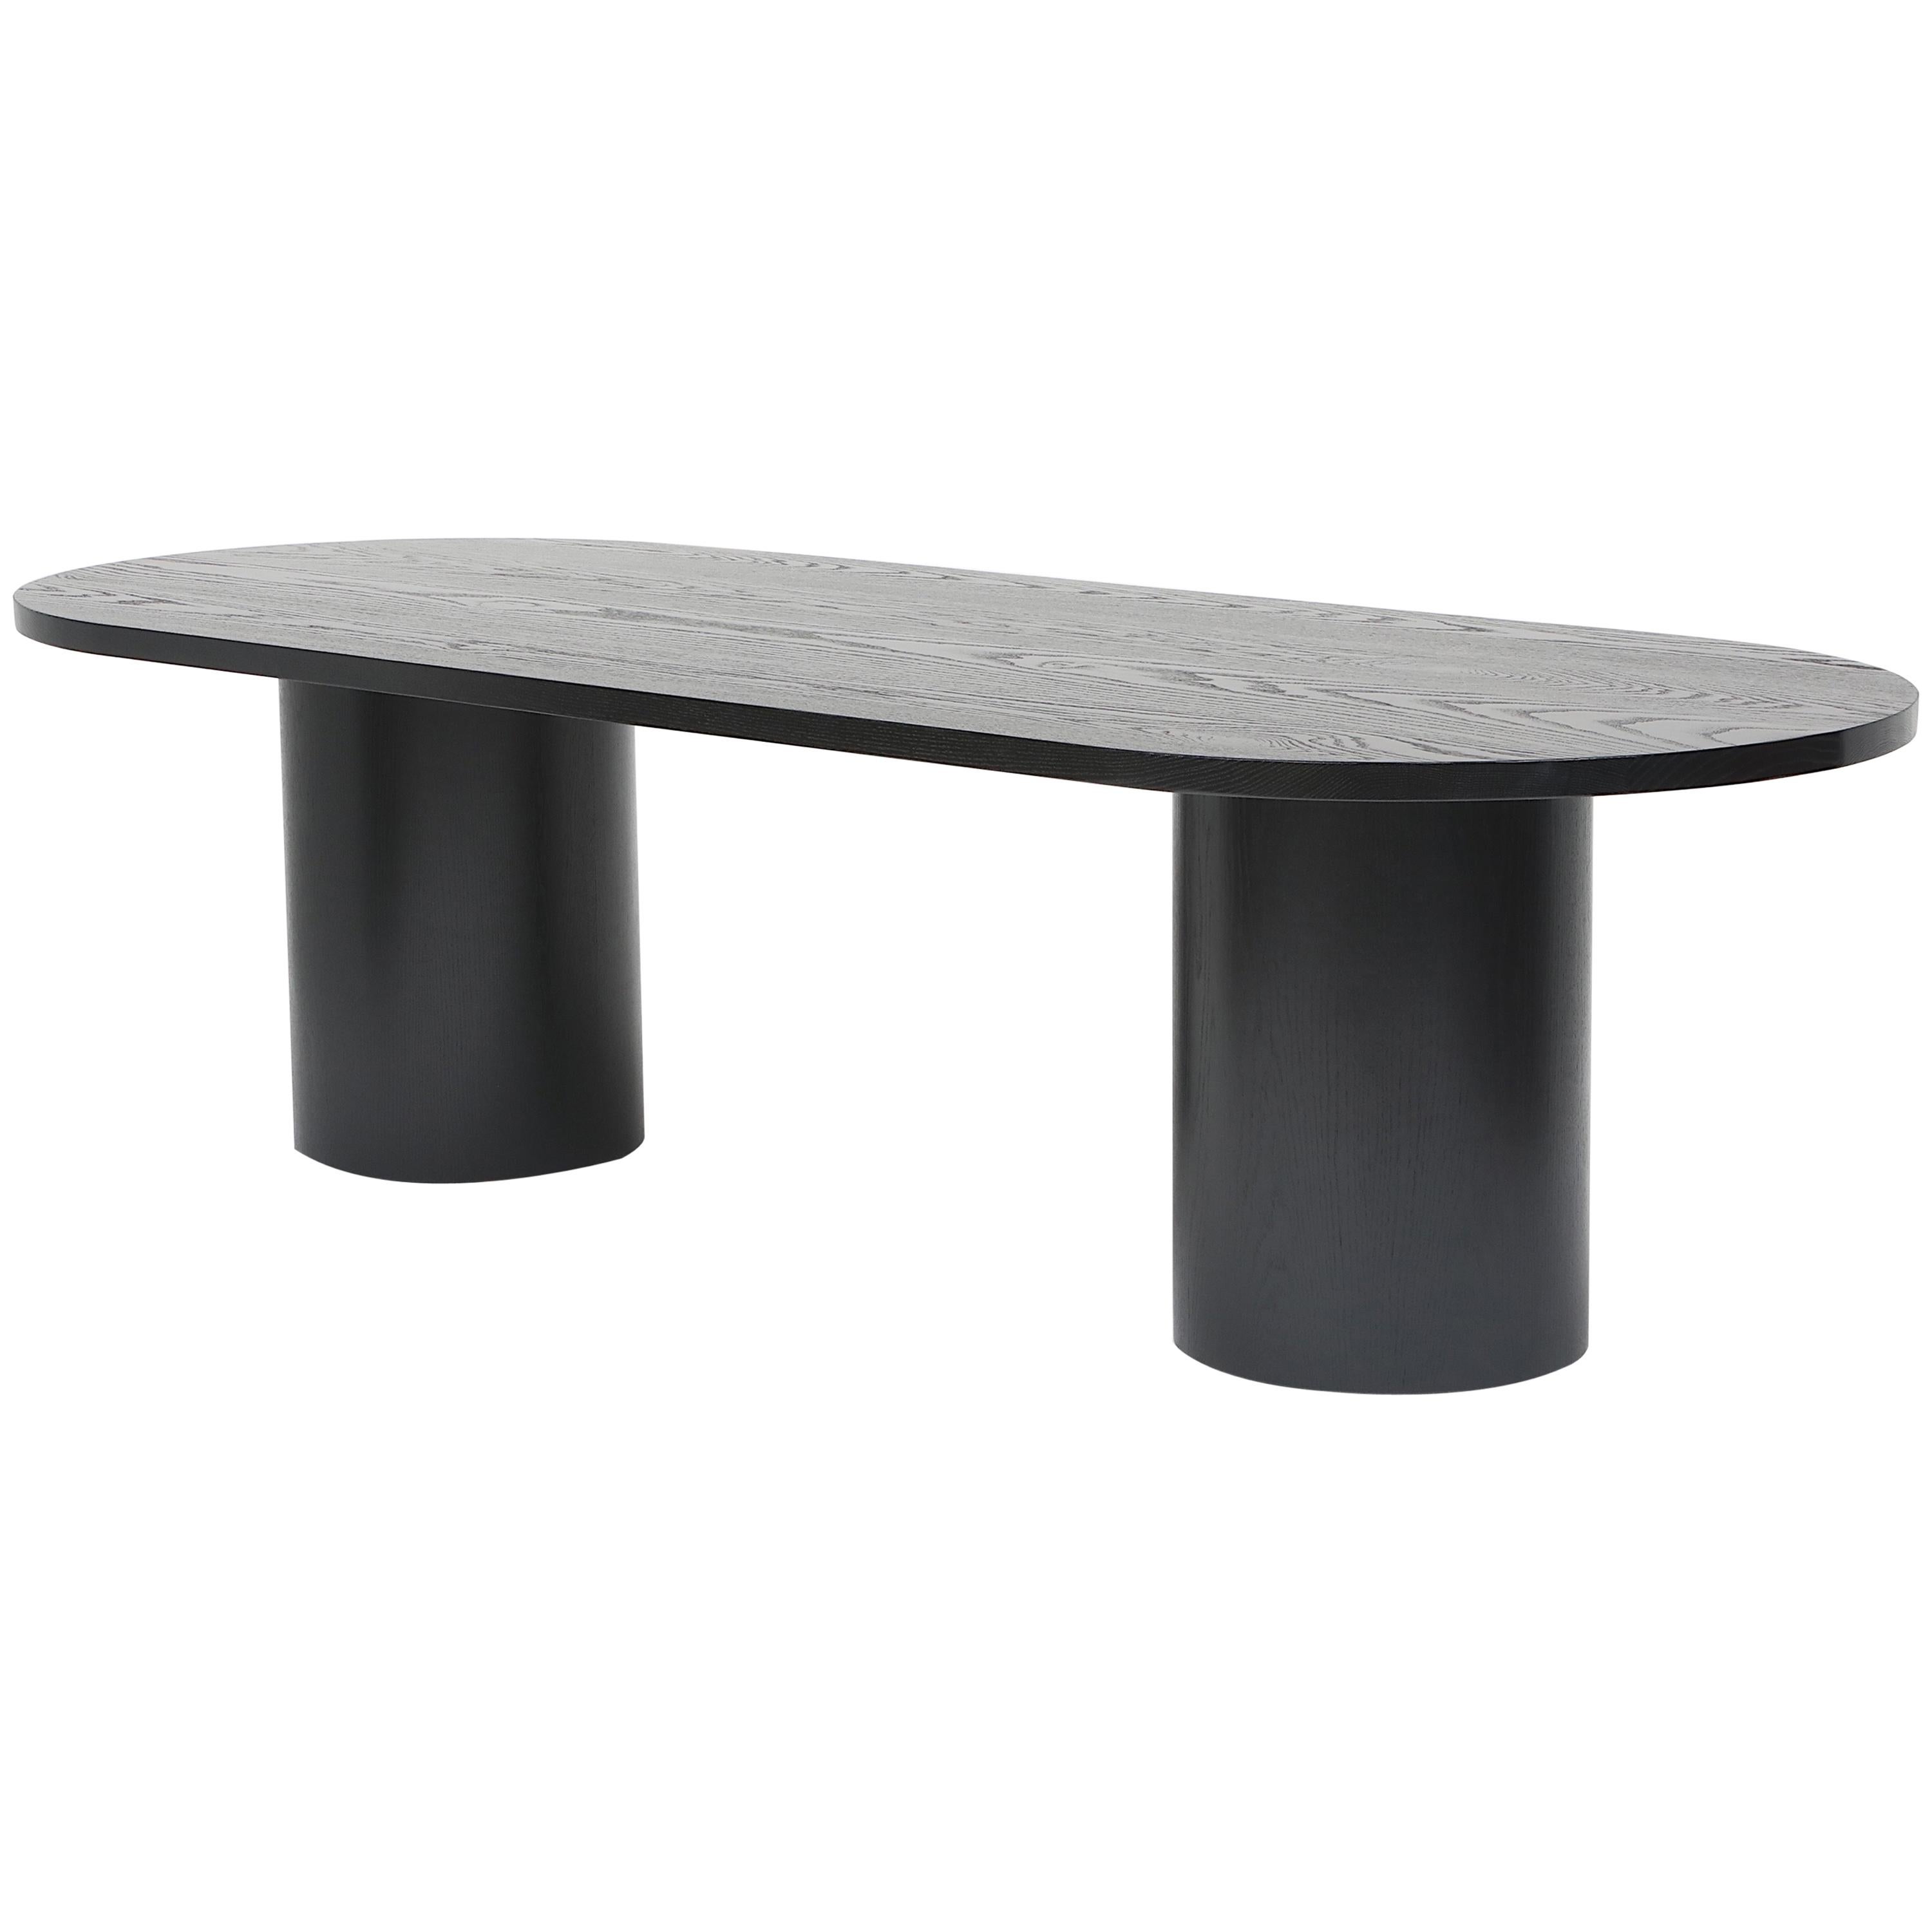 Solid Oakwood Dining Table with Cylinder Legs in Black For Sale